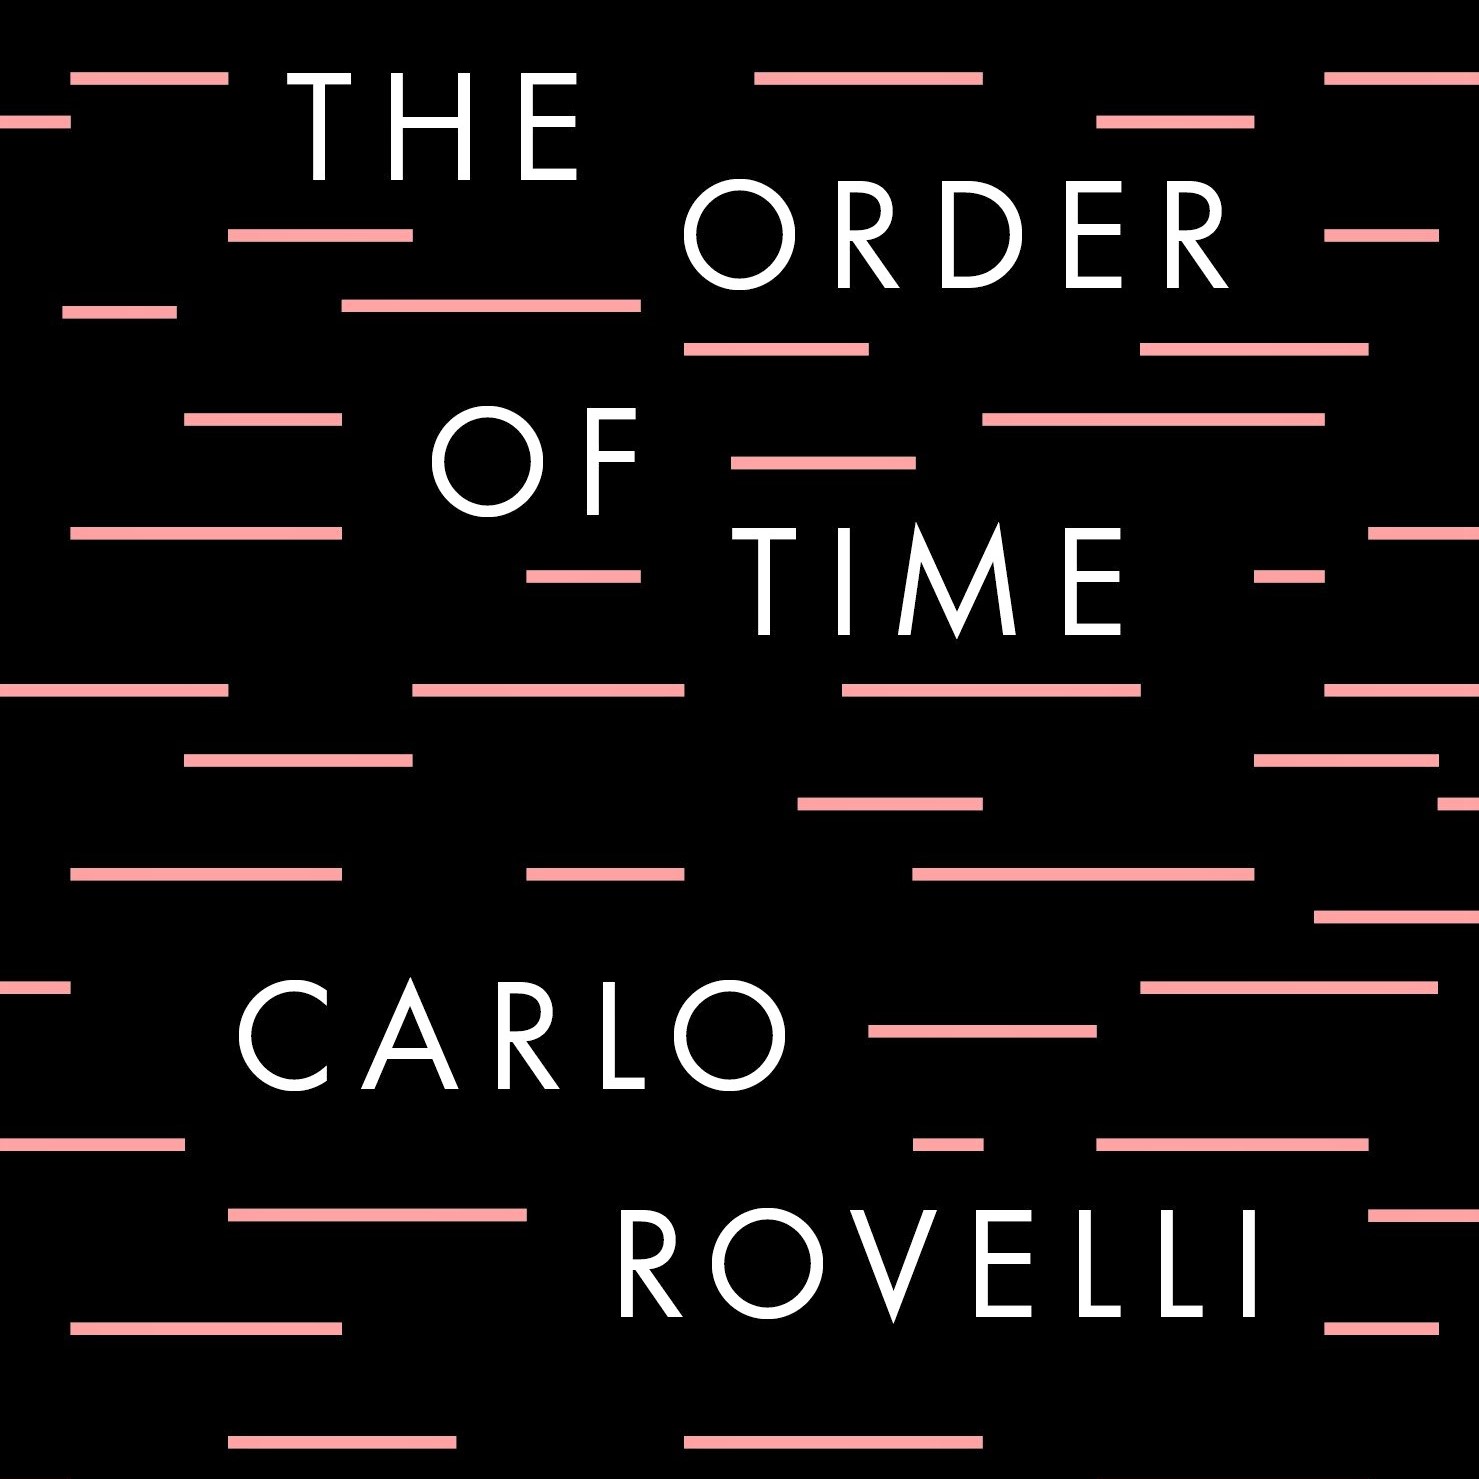 Cover image of Carlo Rovelli's 'The Order of Time'